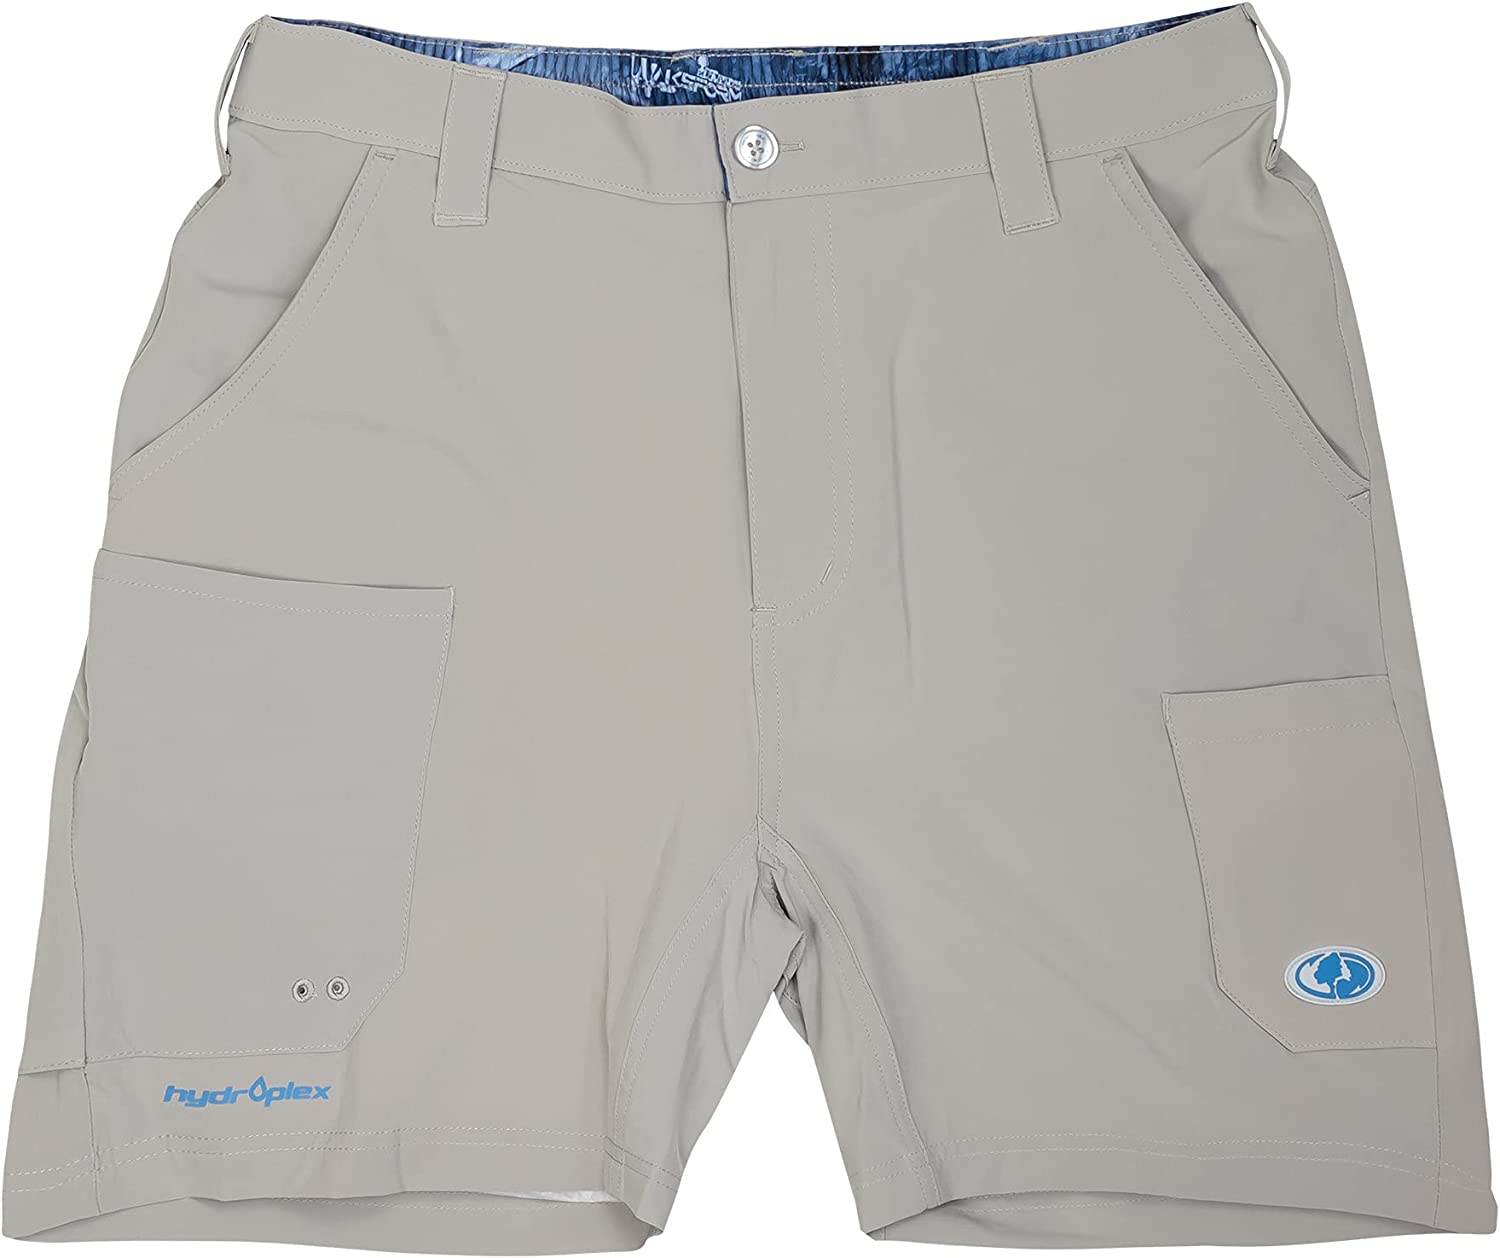 Staghorn Men's Realtree Fishing Camo Lined Short